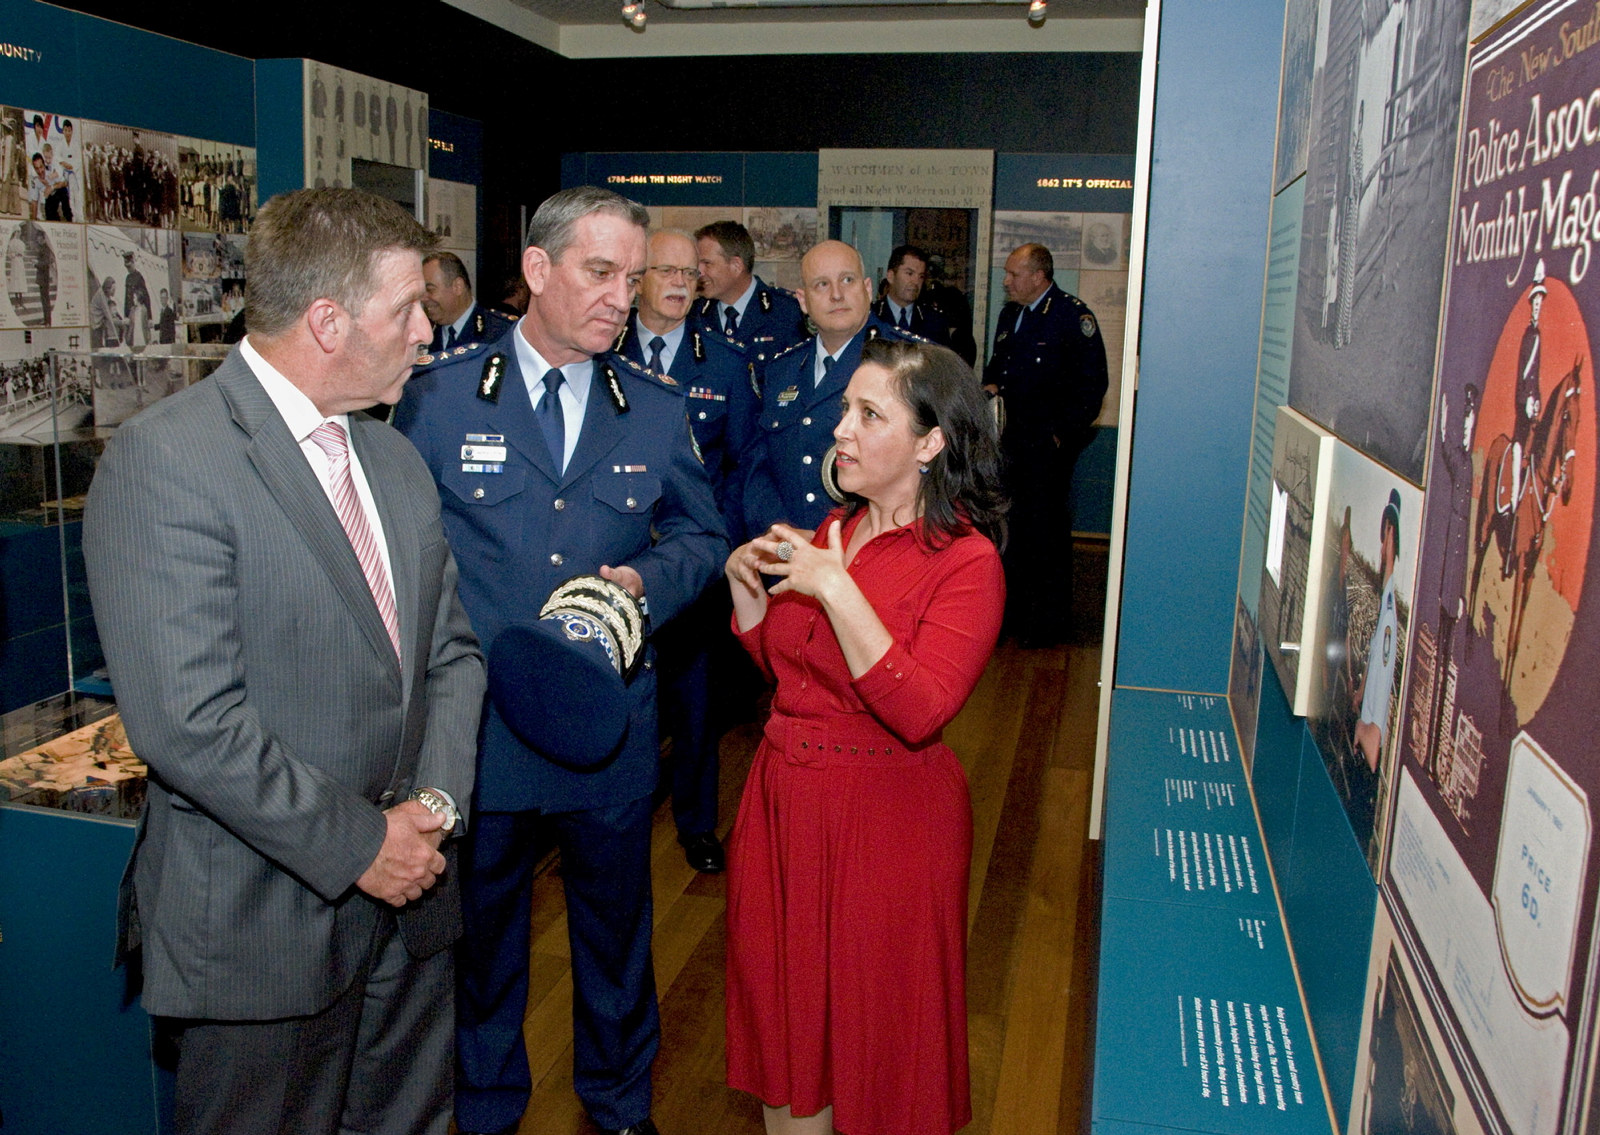 Minister for NSW Police The Hon Michael Gallacher, Commissioner for NSW Police, Andrew Scipione and HHT curator Anna Cossu at the Justice and Police Museum